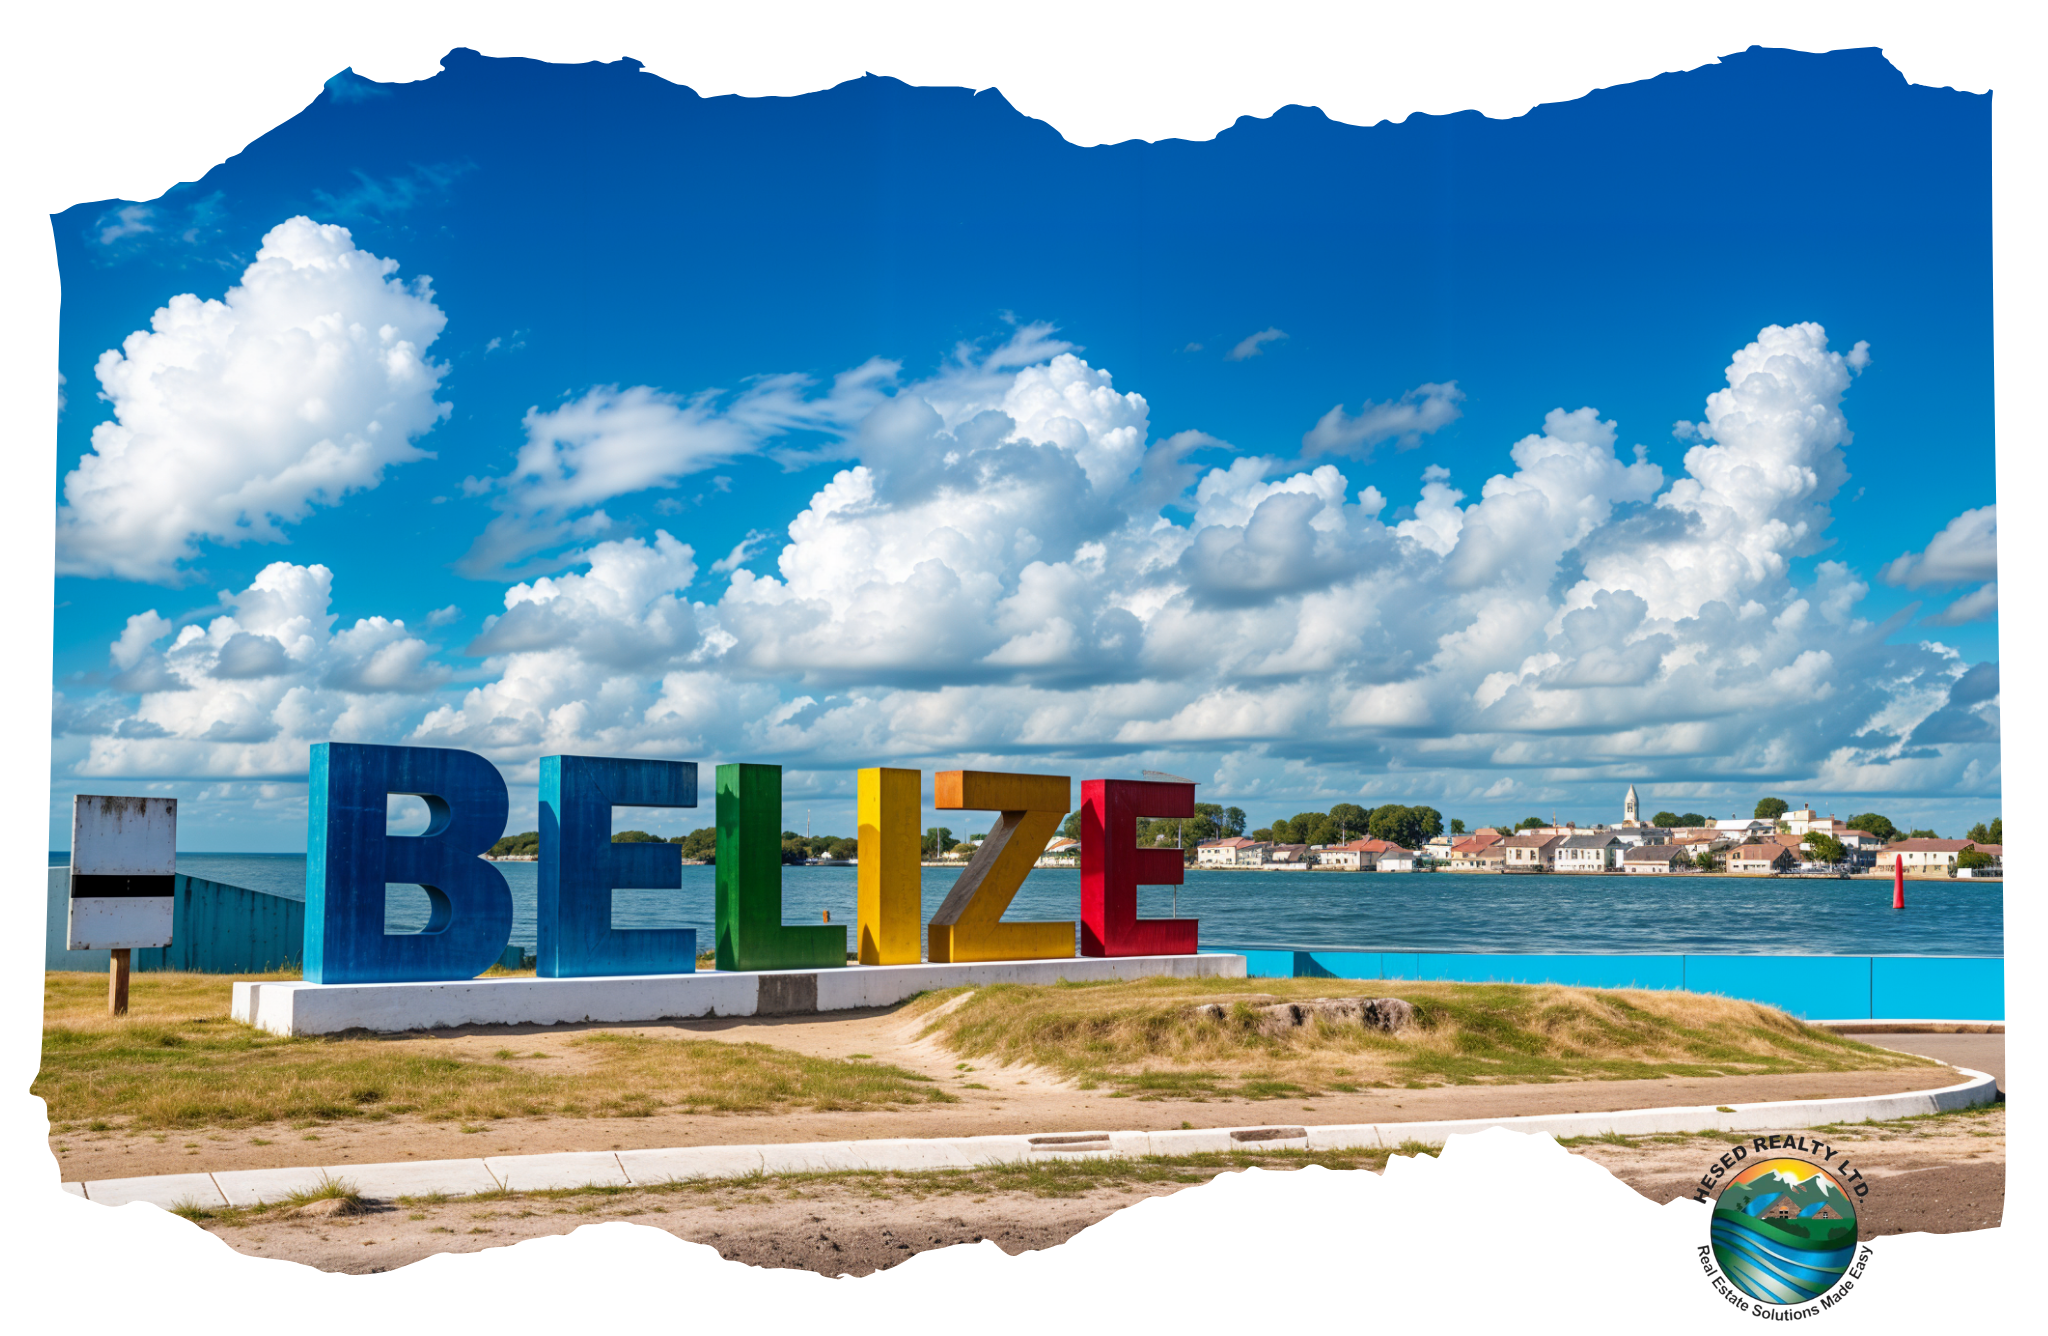 Belize sign with vibrant colors